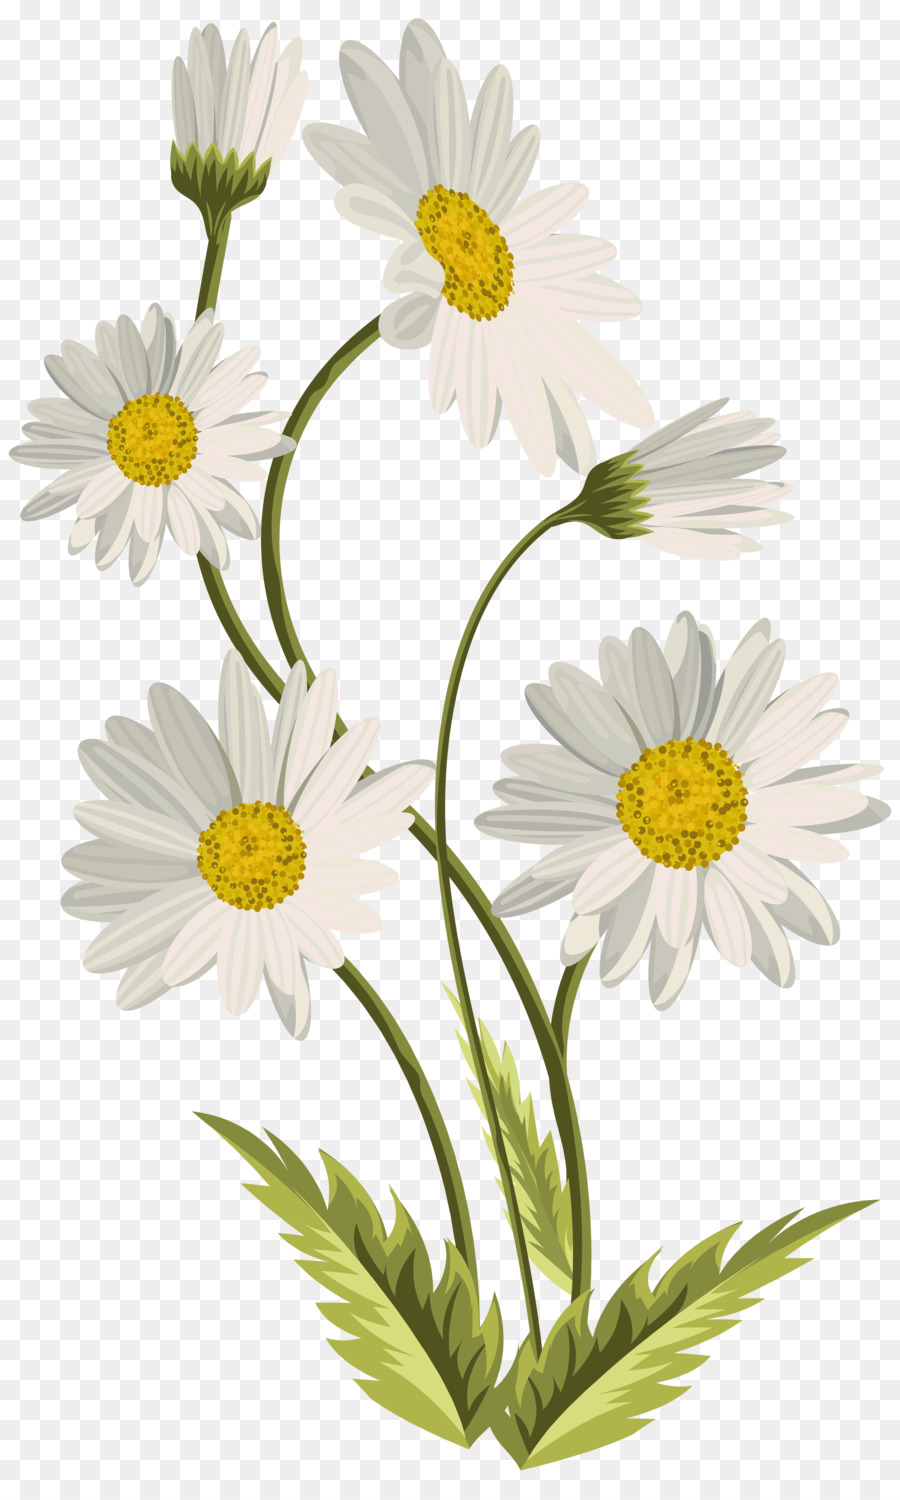 Common daisy Art Clip art - daysies png download - 4861*8000 - Free Transparent Common Daisy png Download.